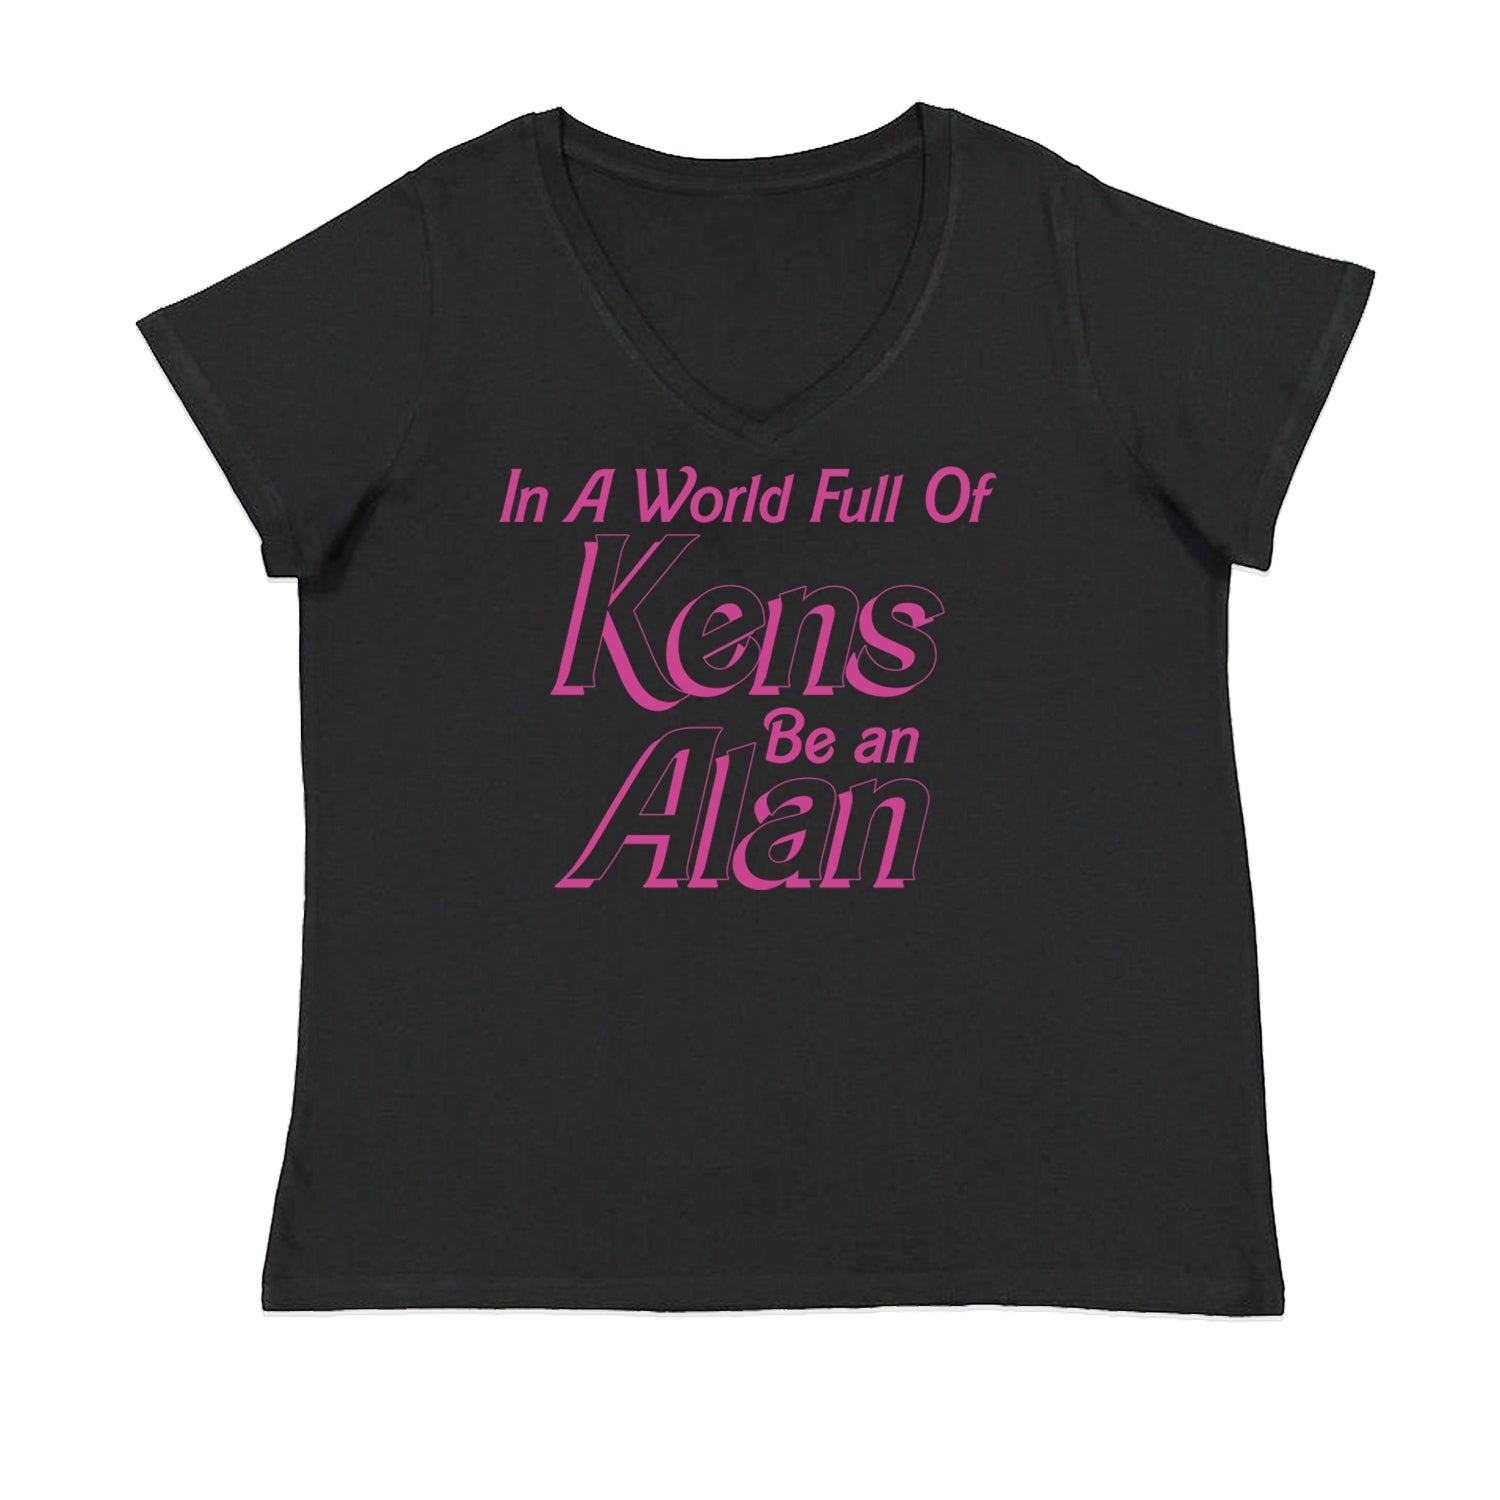 In A World Full Of Kens, Be an Alan Womens Plus Size V-Neck T-shirt